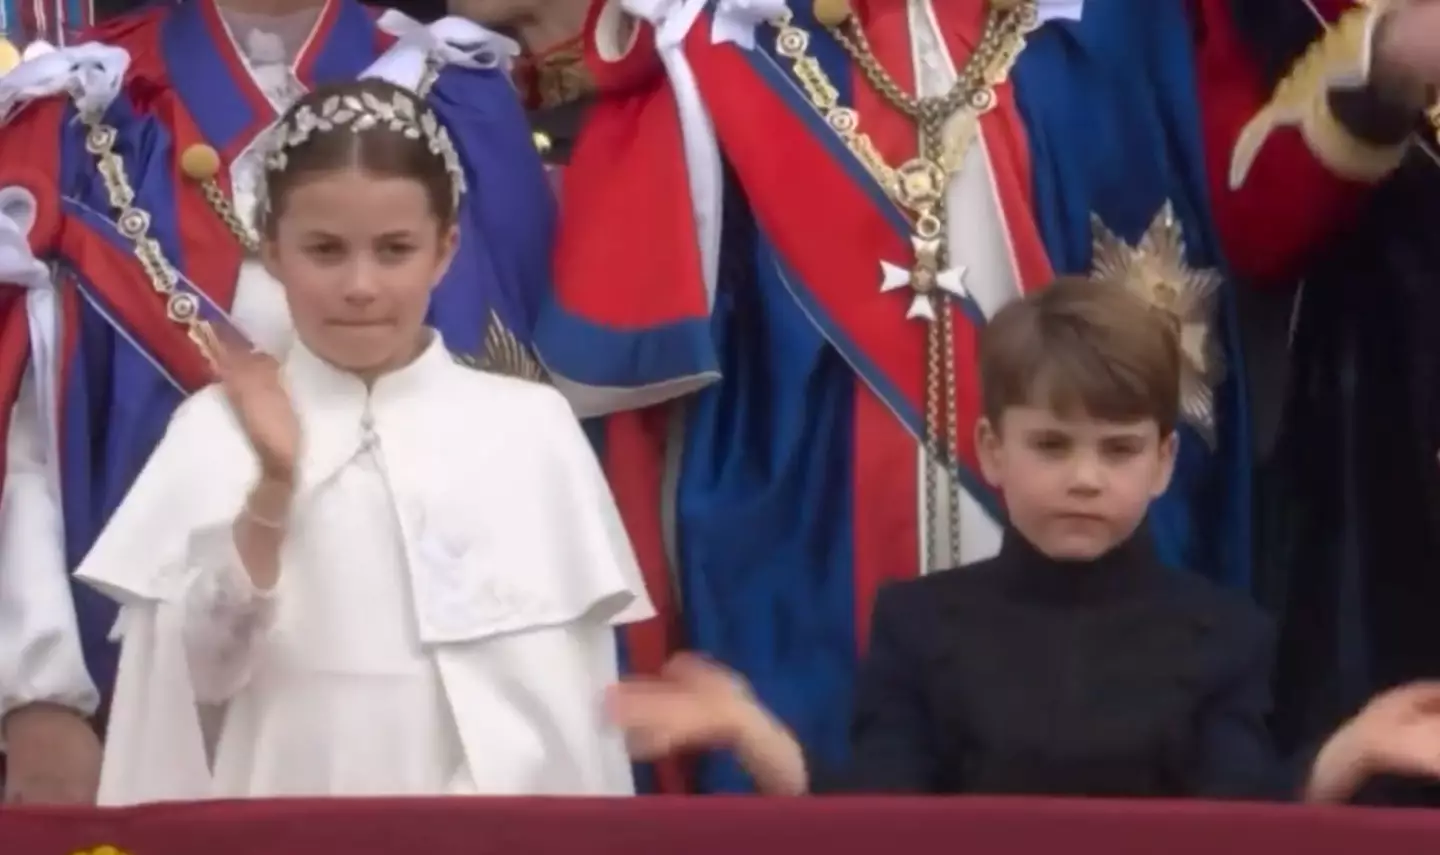 Viewers loved Prince Louis' balcony appearance at his grandfather's coronation.